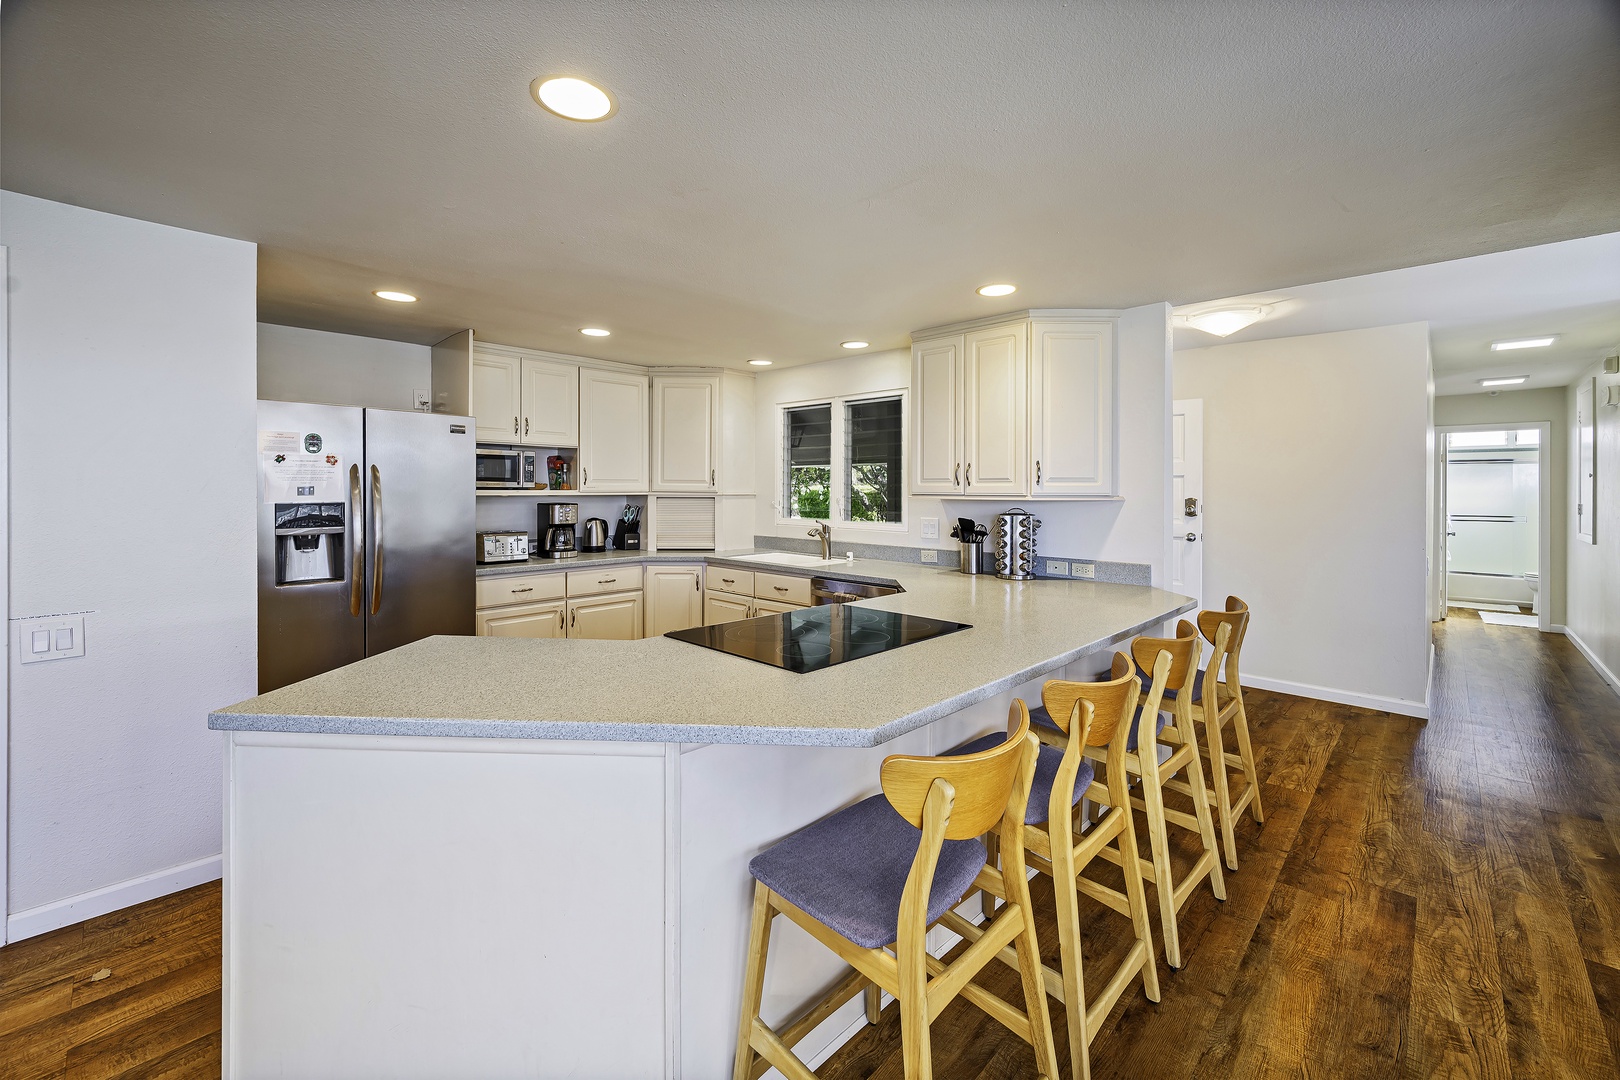 Honolulu Vacation Rentals, Hale Malia - This kitchen offers the perfect space for entertaining with breakfast bar seating